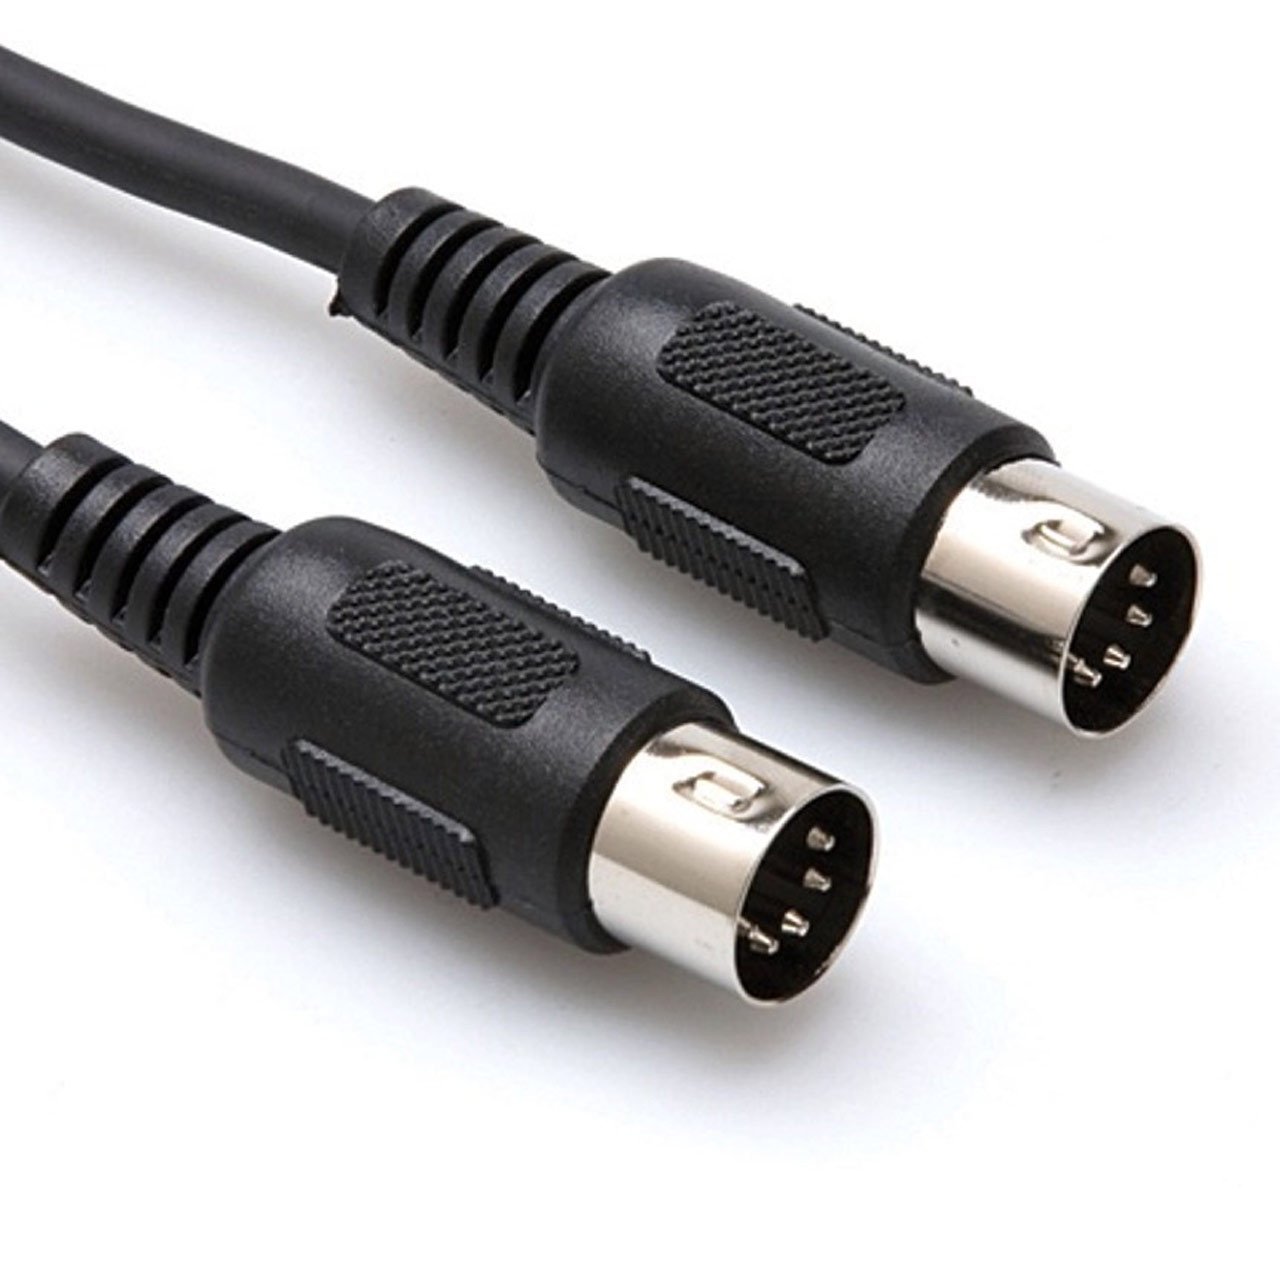 Cables & Adapters - Hosa MIDI Cable, Black - 5-pin DIN To Same